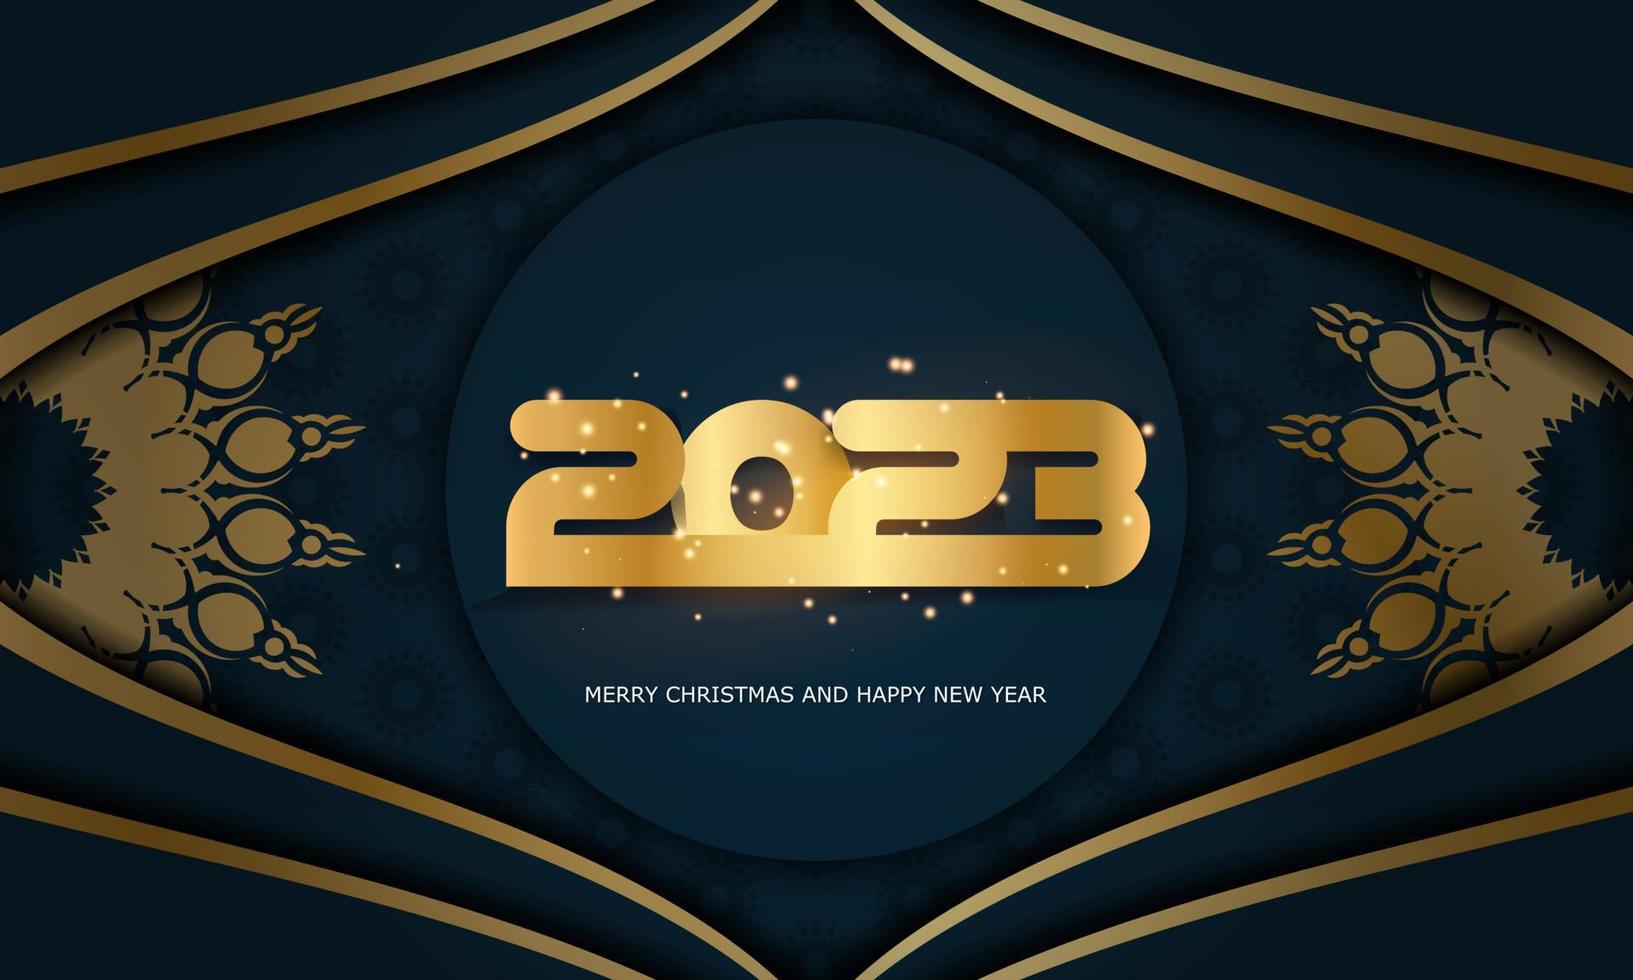 2023 happy new year greeting poster. Blue and gold color. vector